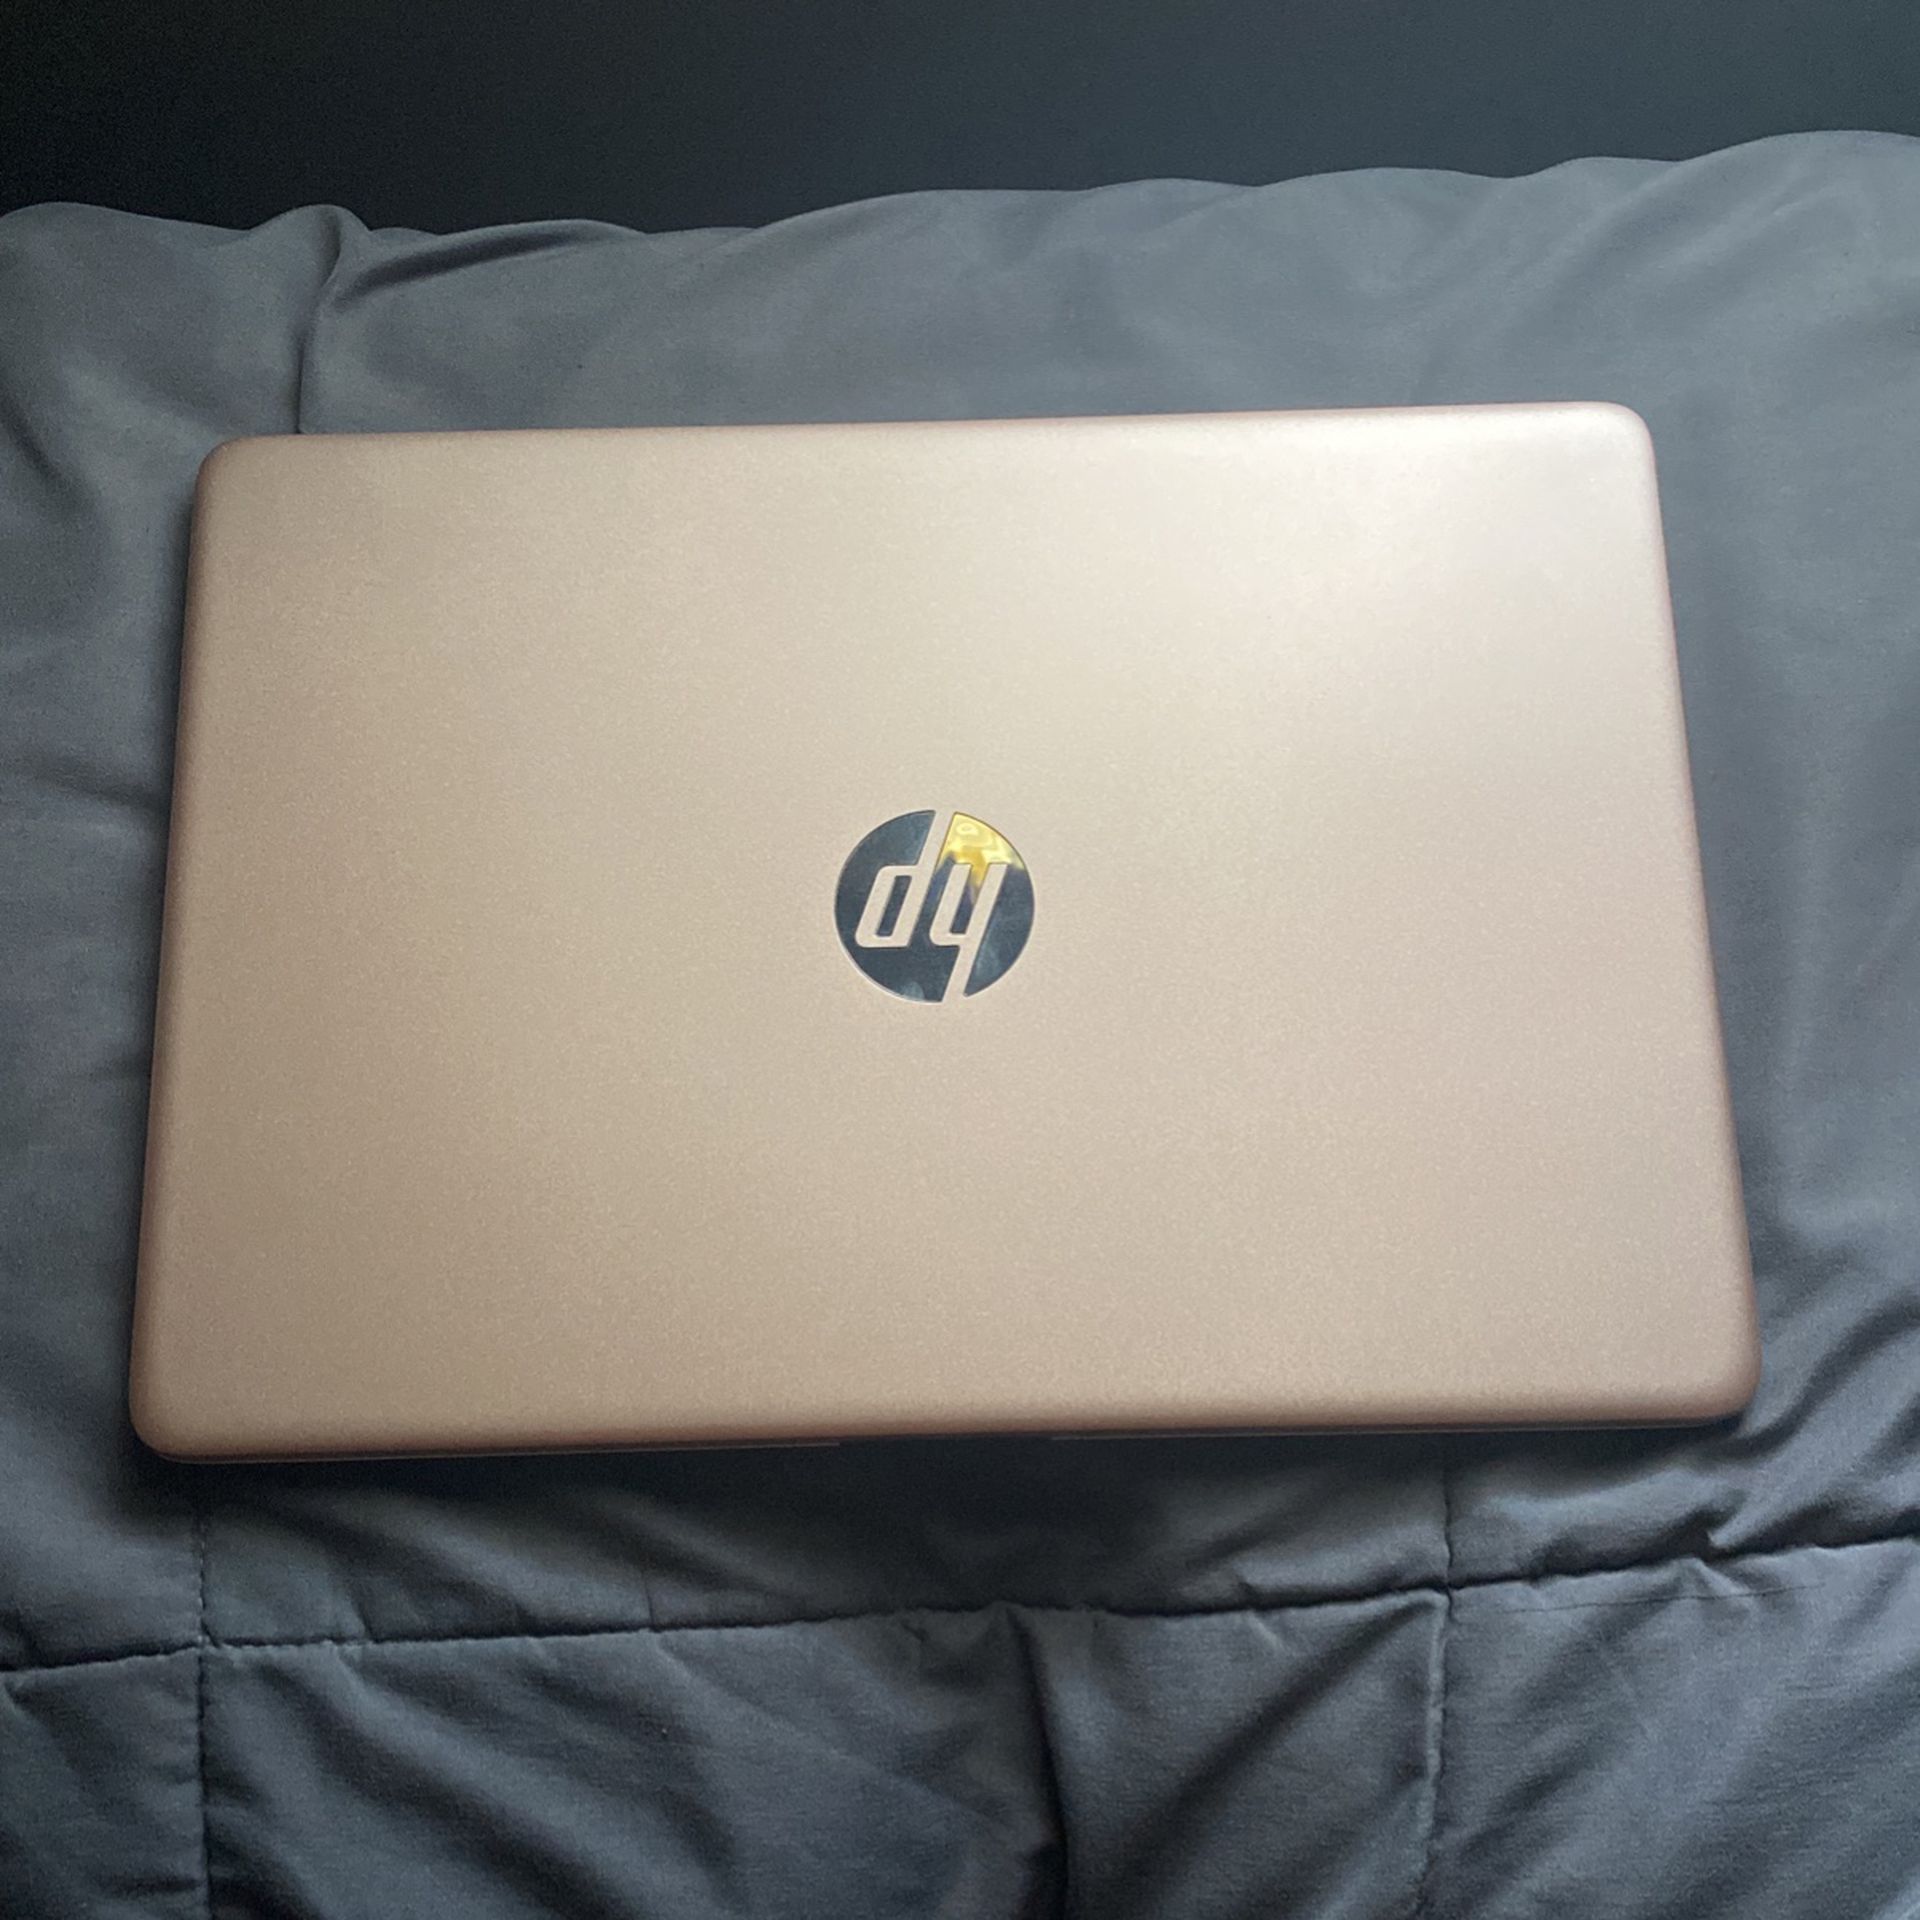 HP Laptop. Touch Screen. Rose Gold. 4k. 